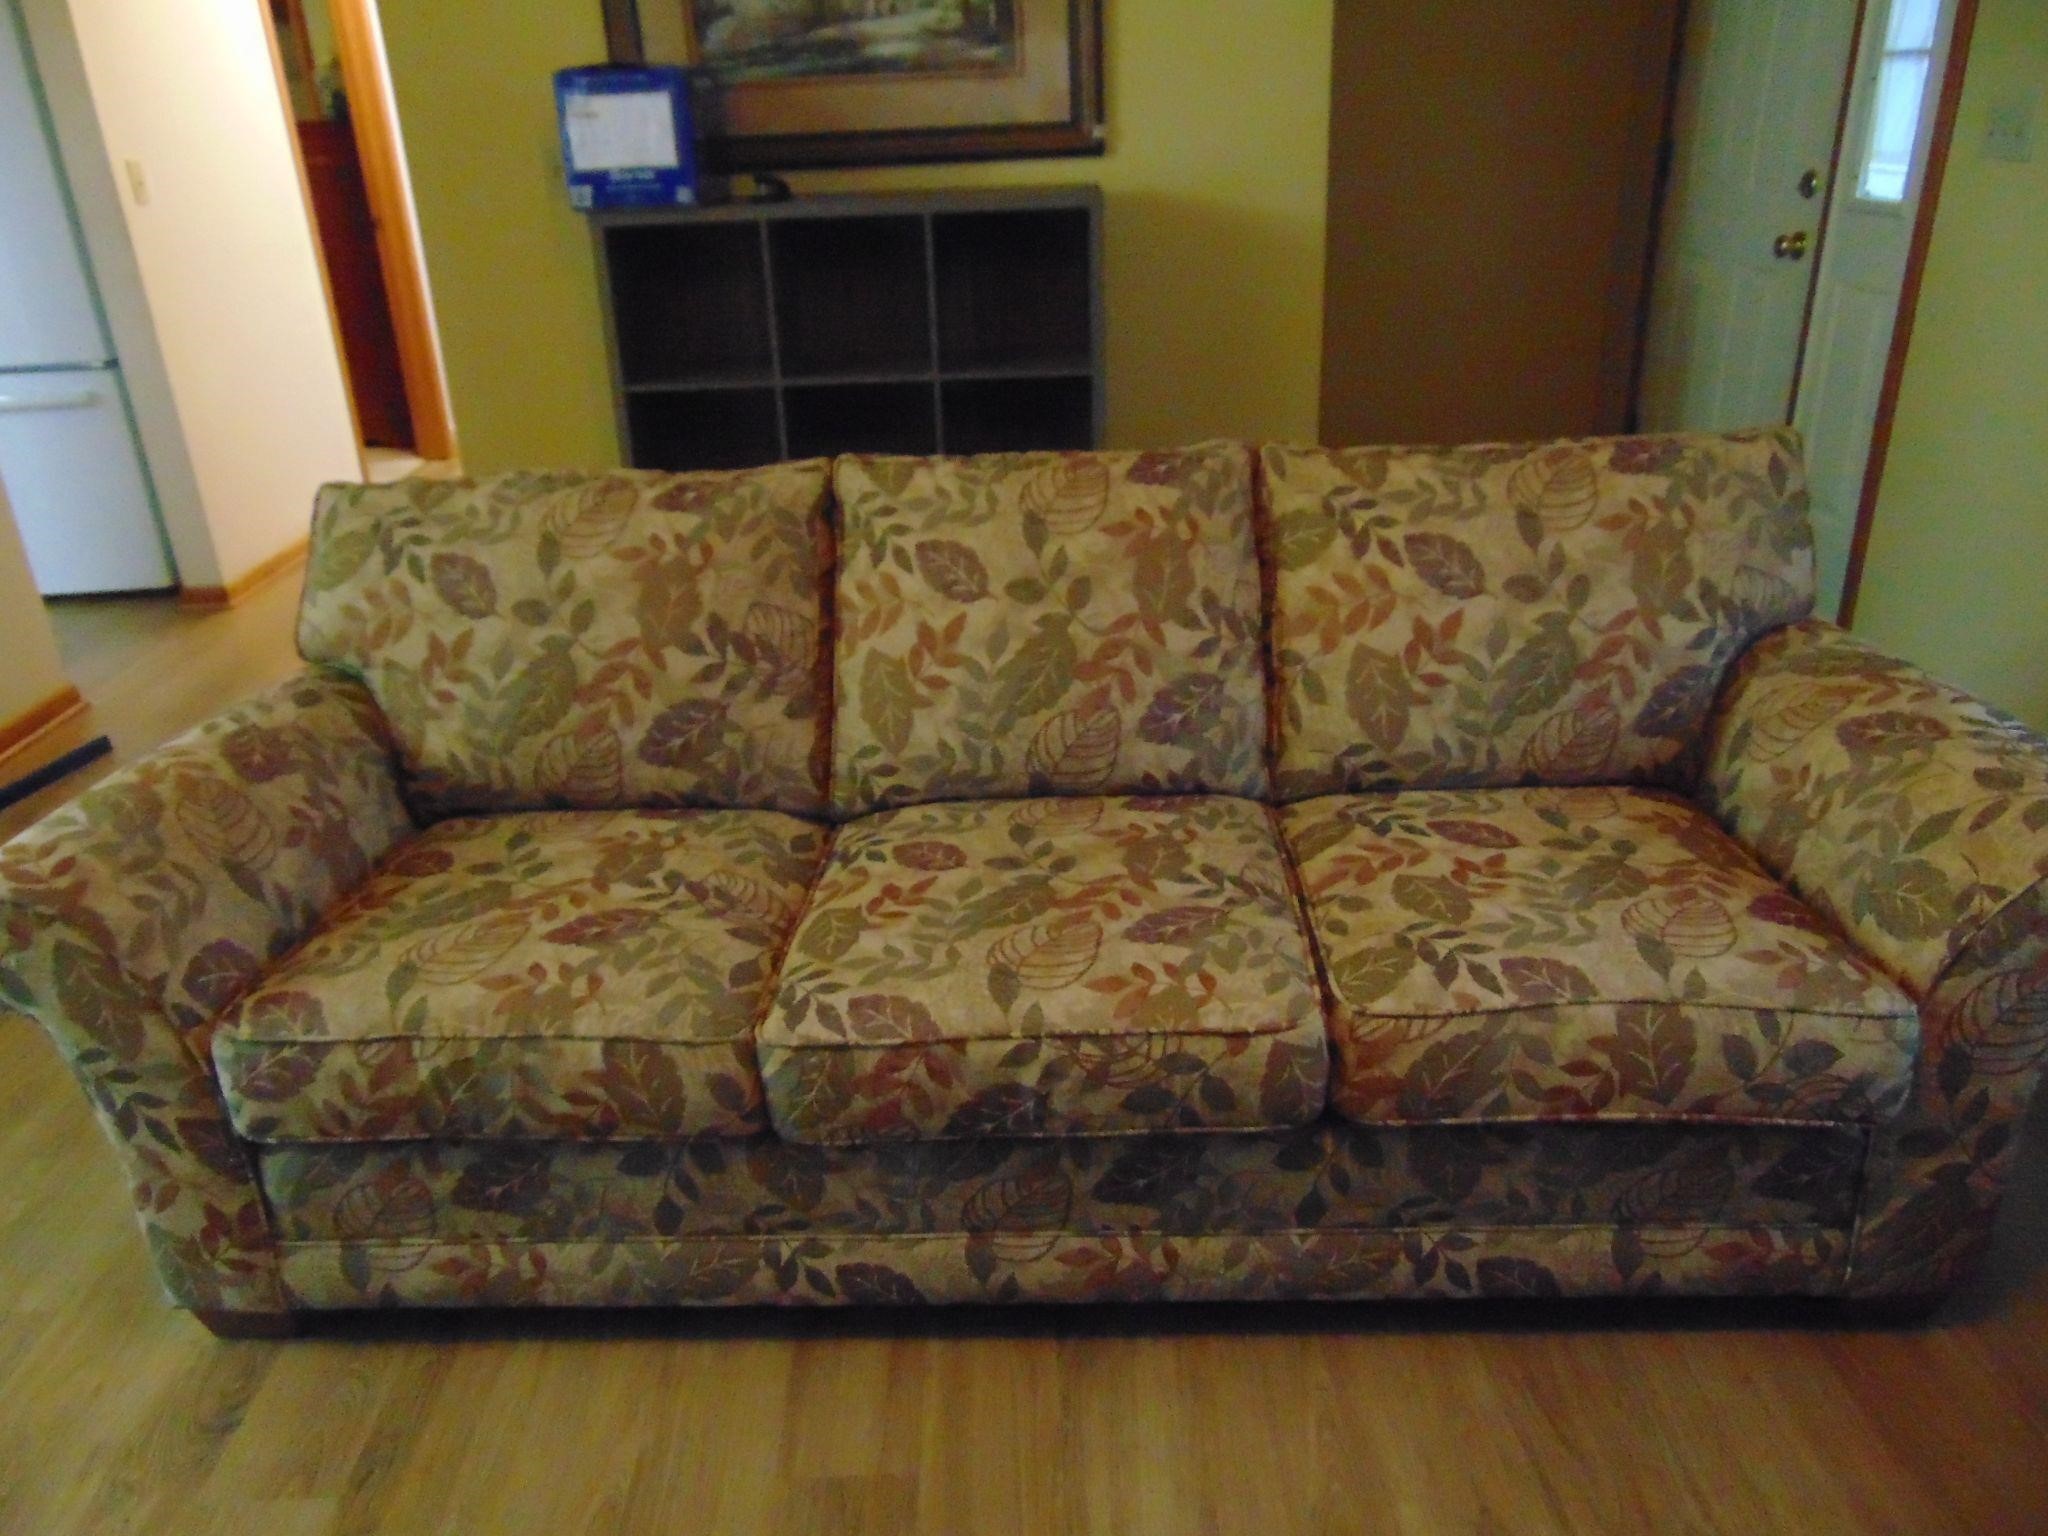 Sofa in good shape. No stains, rips or wear